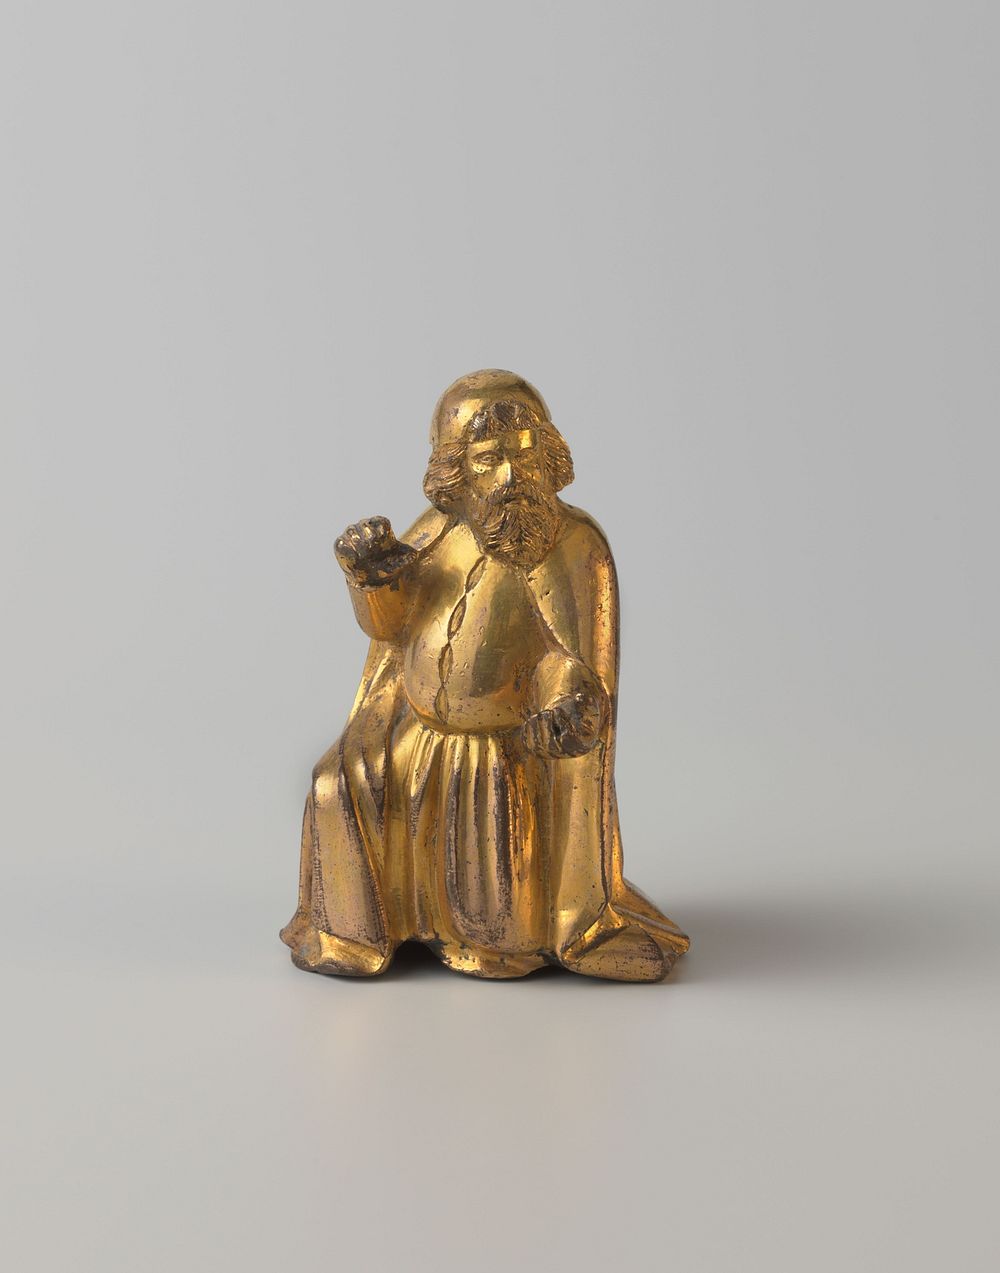 Two kneeling prophets (from a reliquary châsse) (c. 1400 - c. 1410) by anonymous